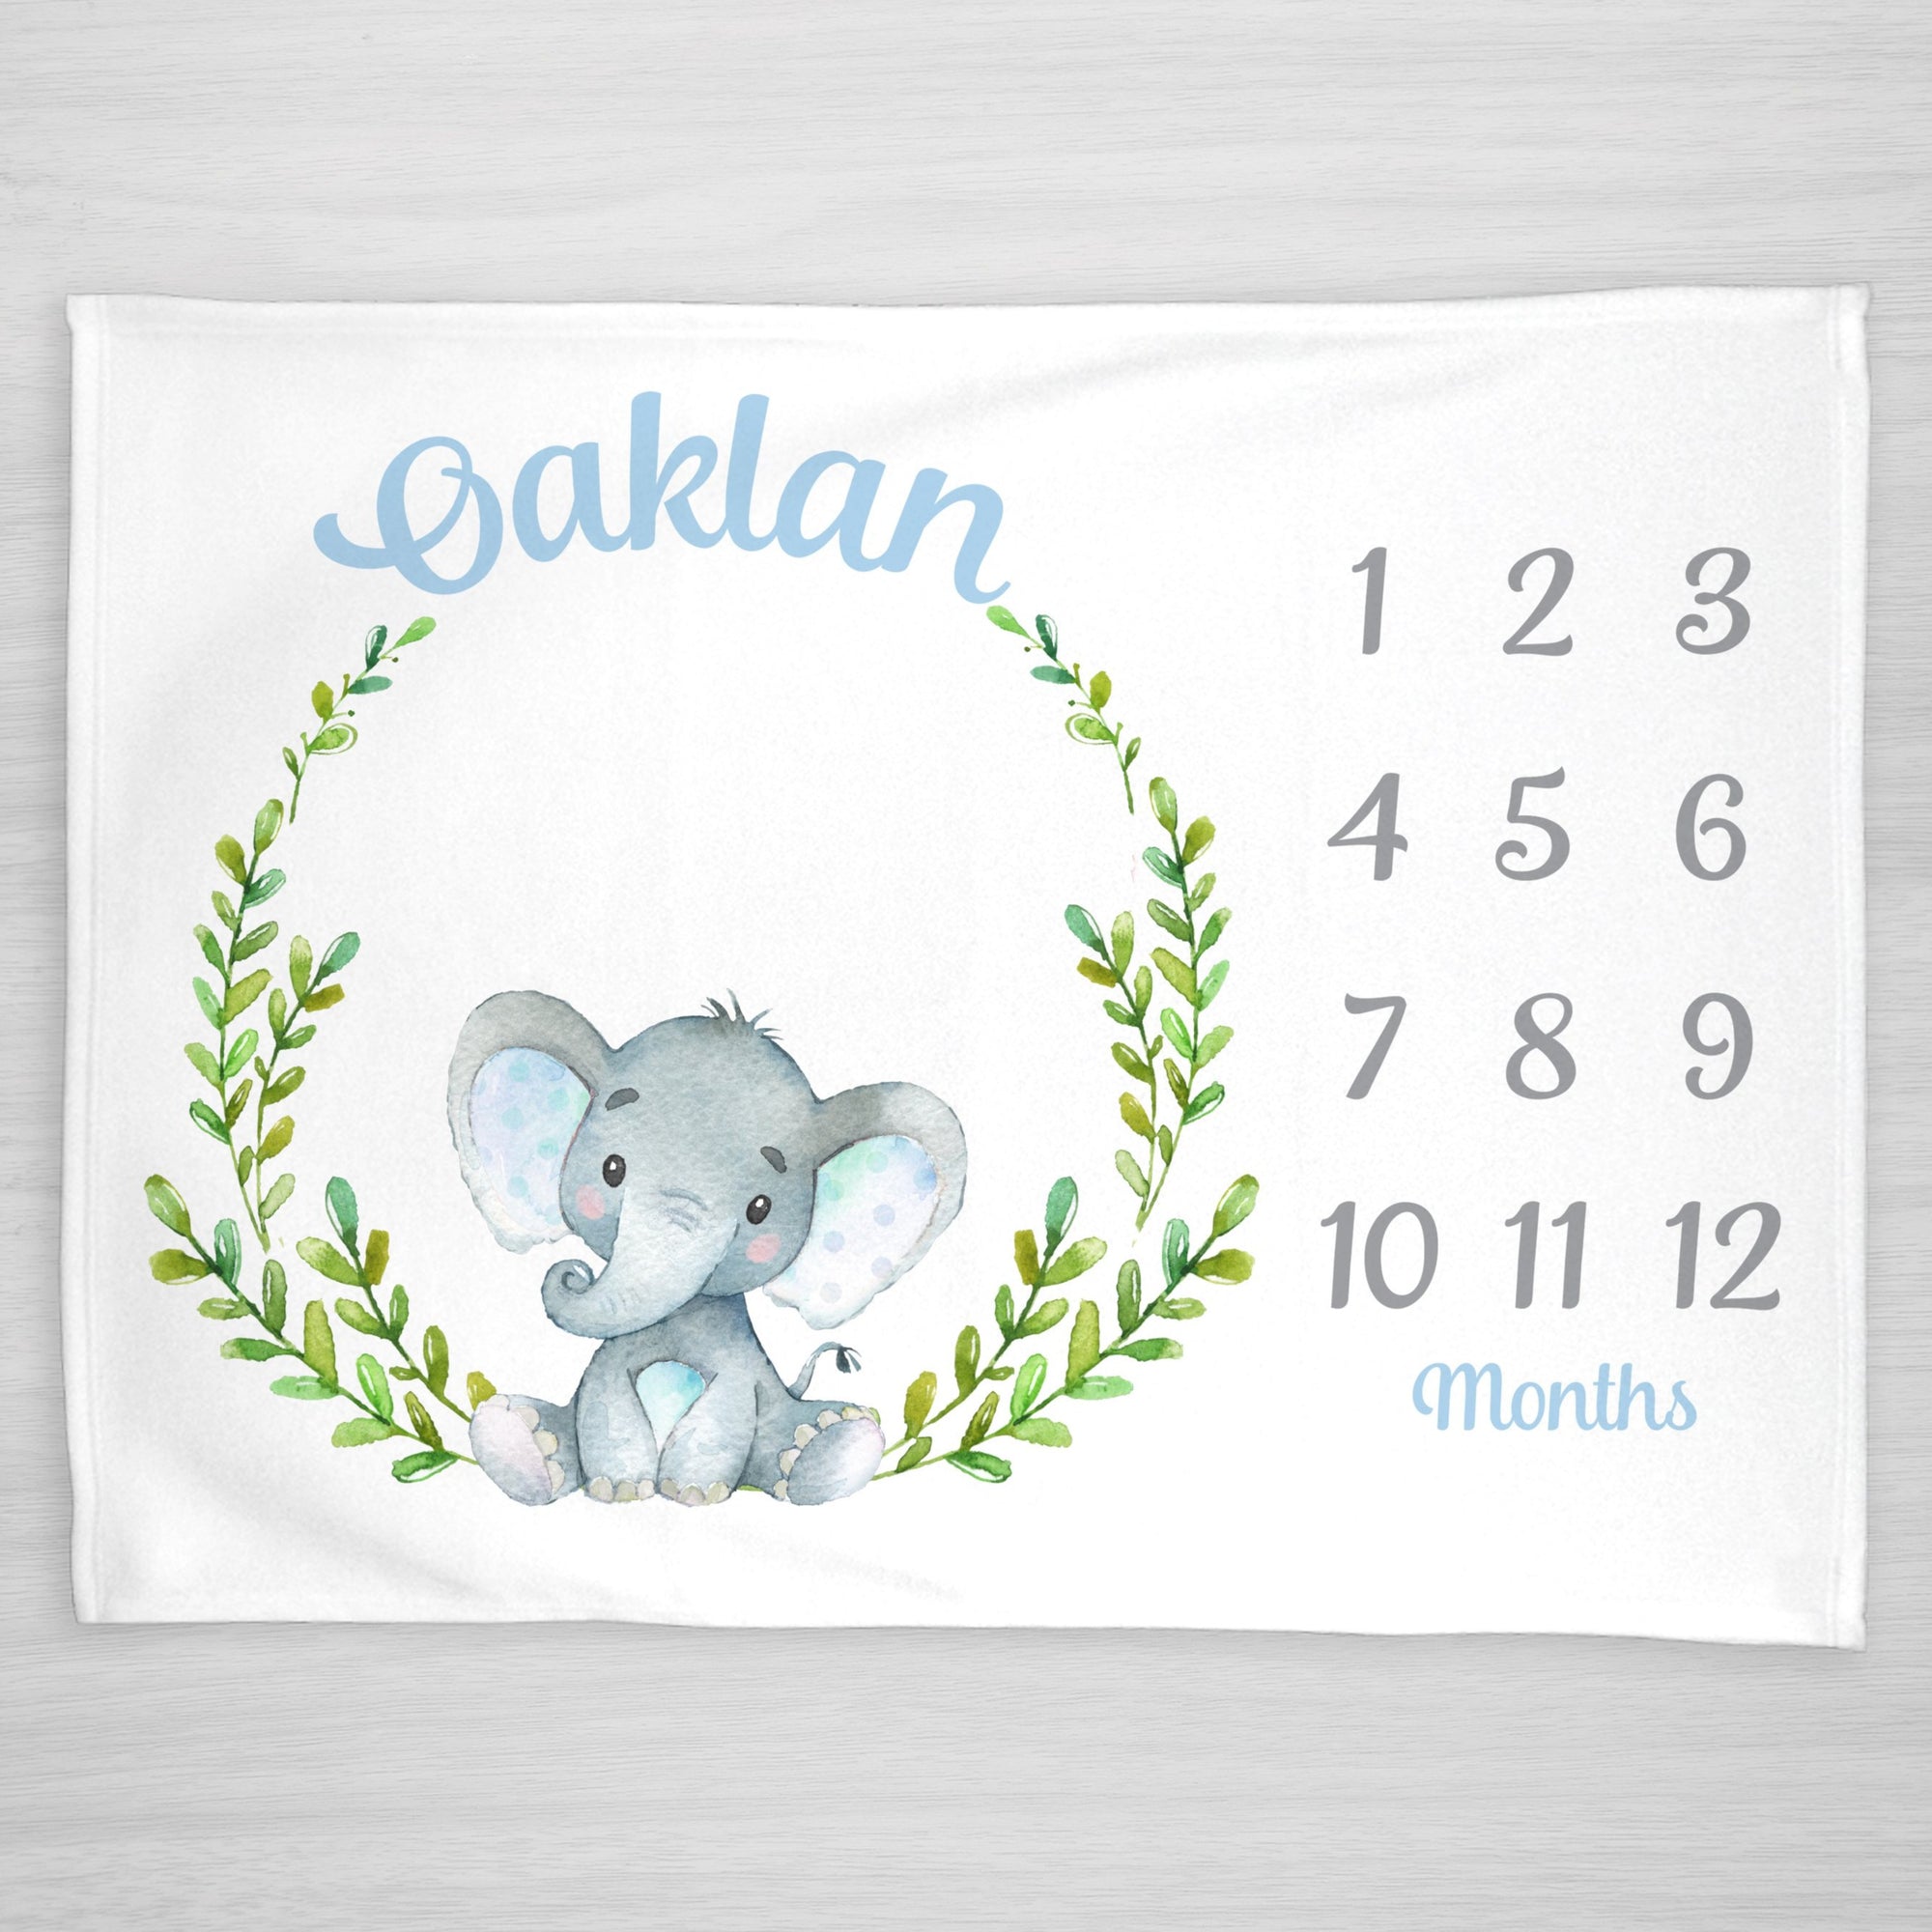 Elephant Milestone Blanket, Personalized, with a cute watercolor elephant in a green wreath